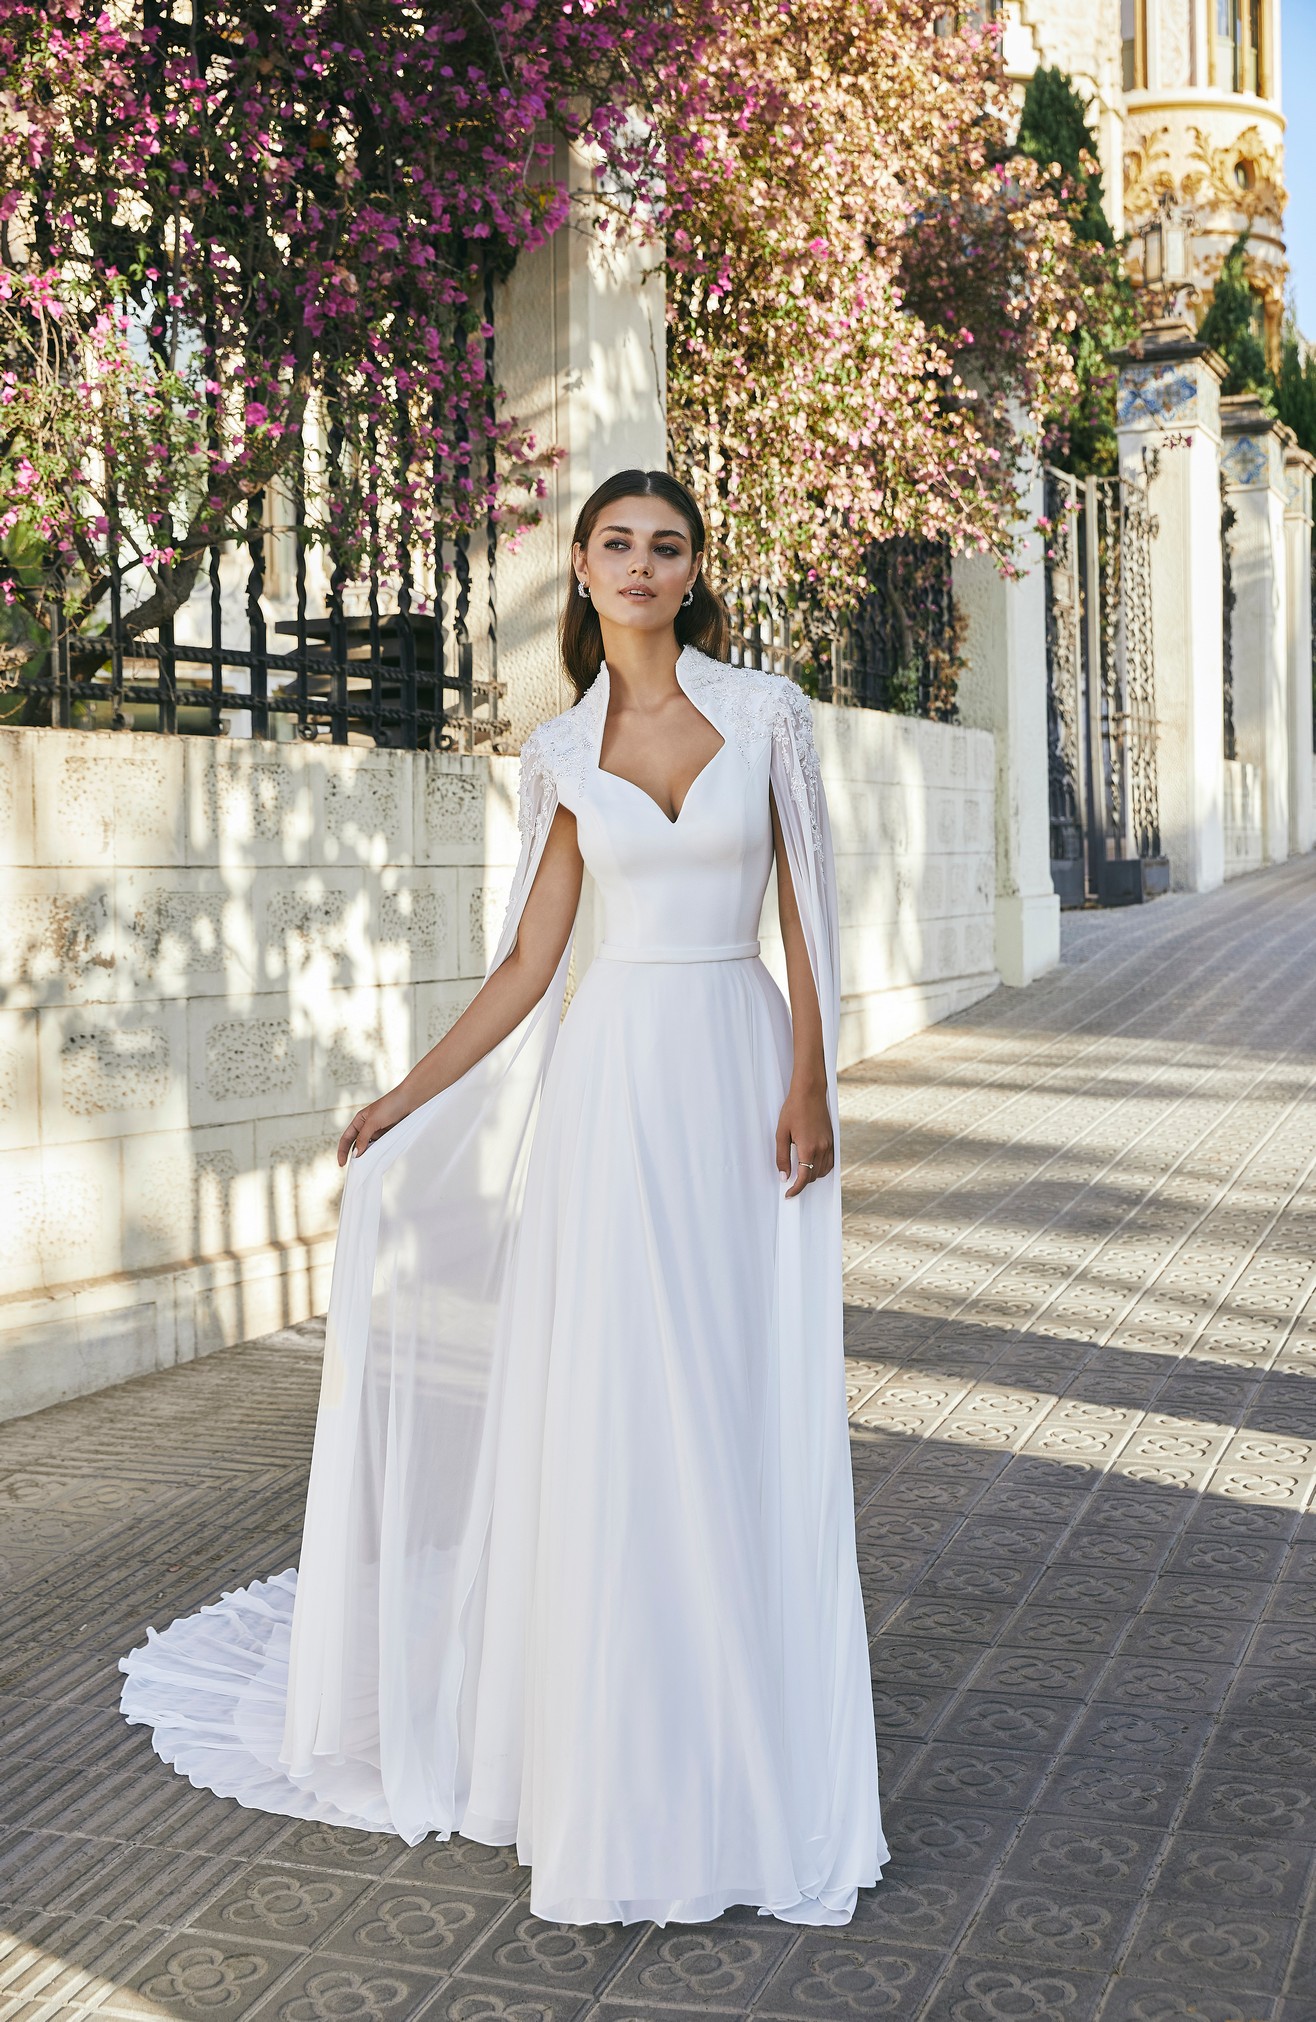 Model stood on a sunny floral Italian path in Ronald Joyce style 69708, an A-line wedding dress with a beaded Queen Anne collar, delicate plain belt and attached chiffon cape complete with beaded shoulder appliques